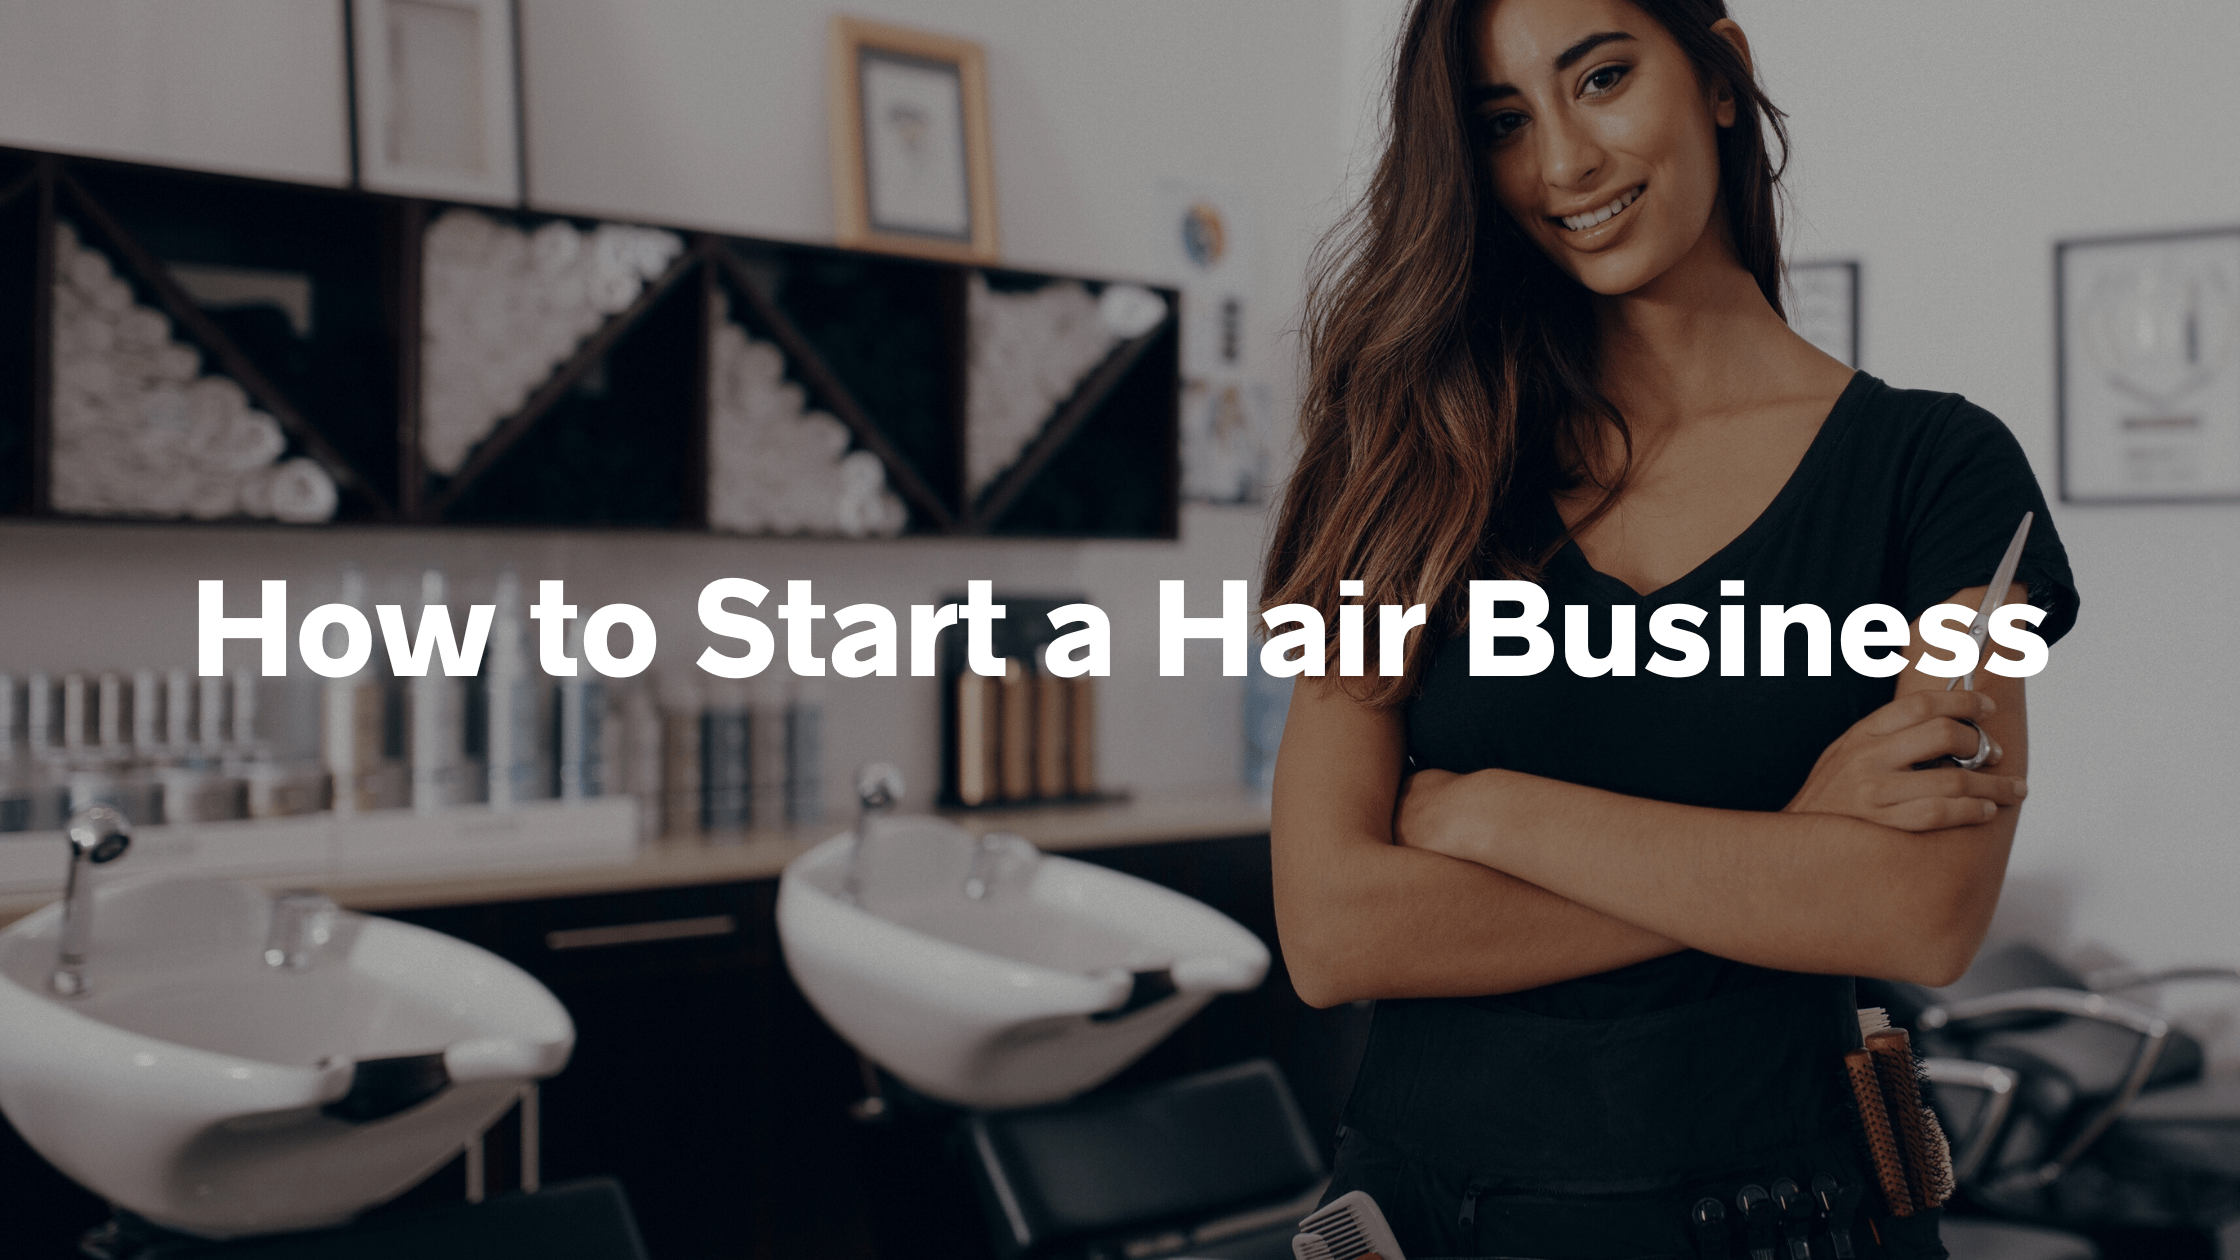 How to start a hair business